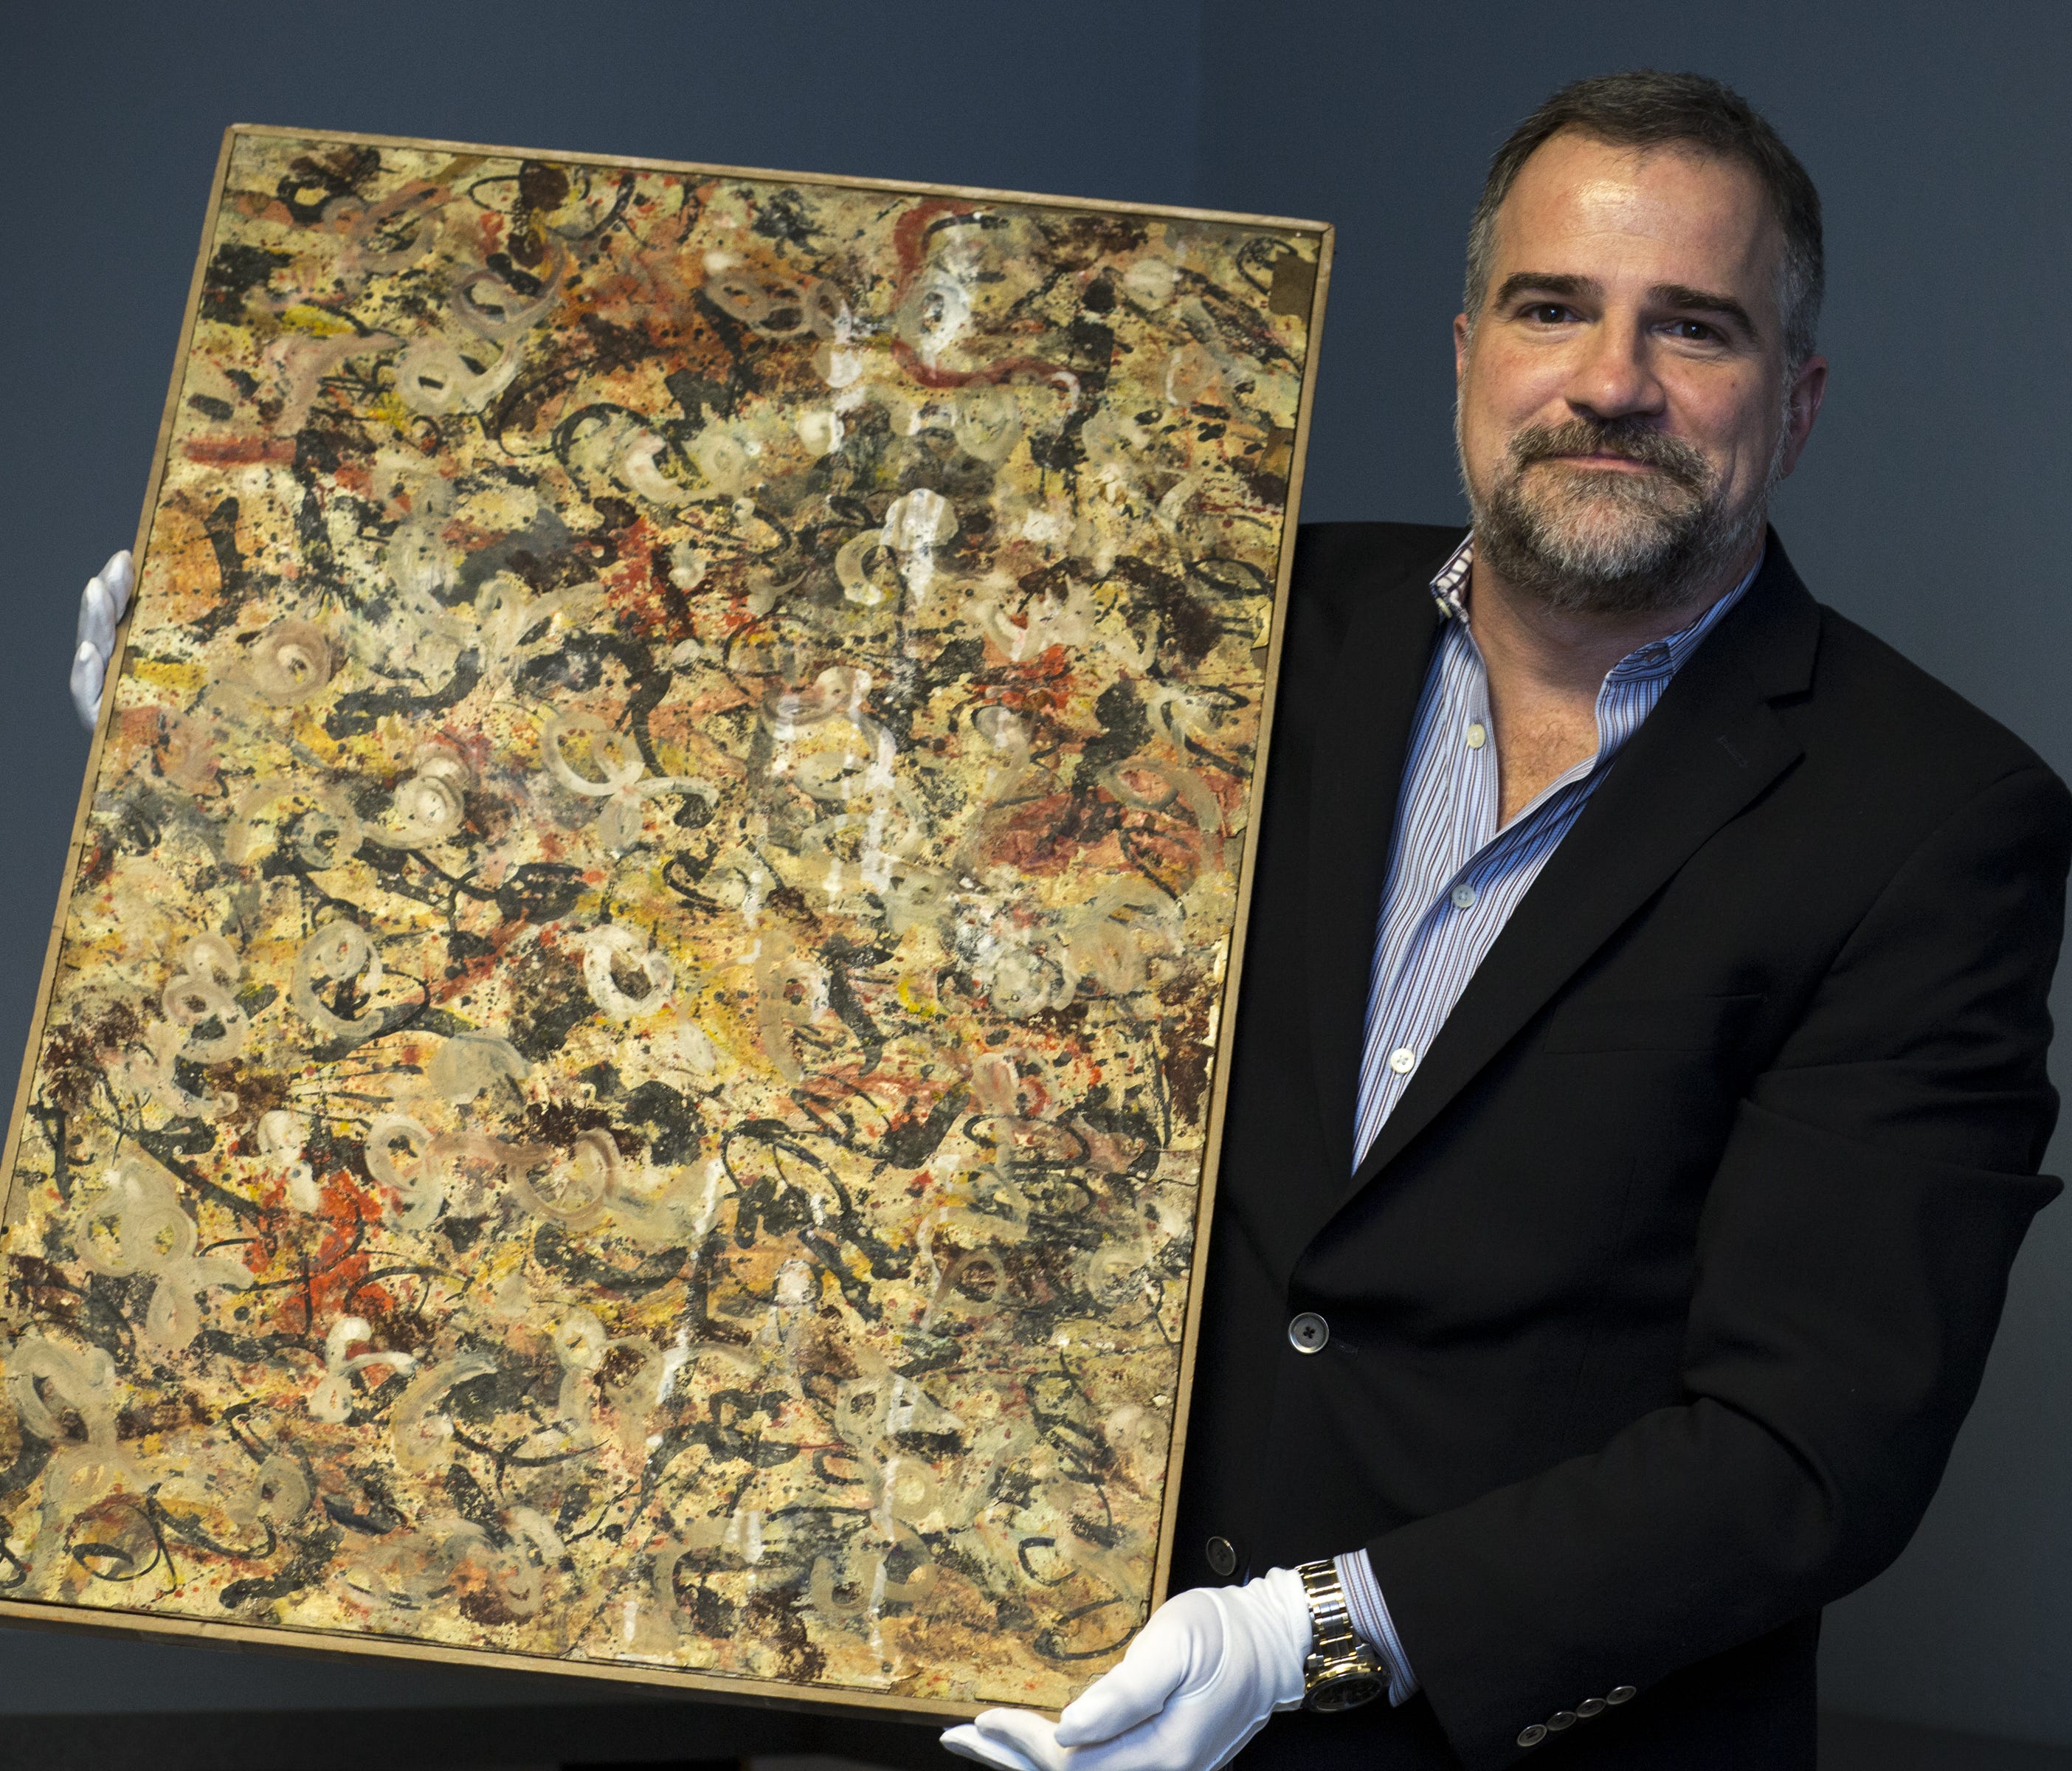 Josh Levine with an original Jackson Pollock painting, June 6, 2017, at J. Levine Auction and Appraisal, 10345 N. Scottsdale Road, Scottsdale. Levine expects the painting to sell between $10 million and $15 million.